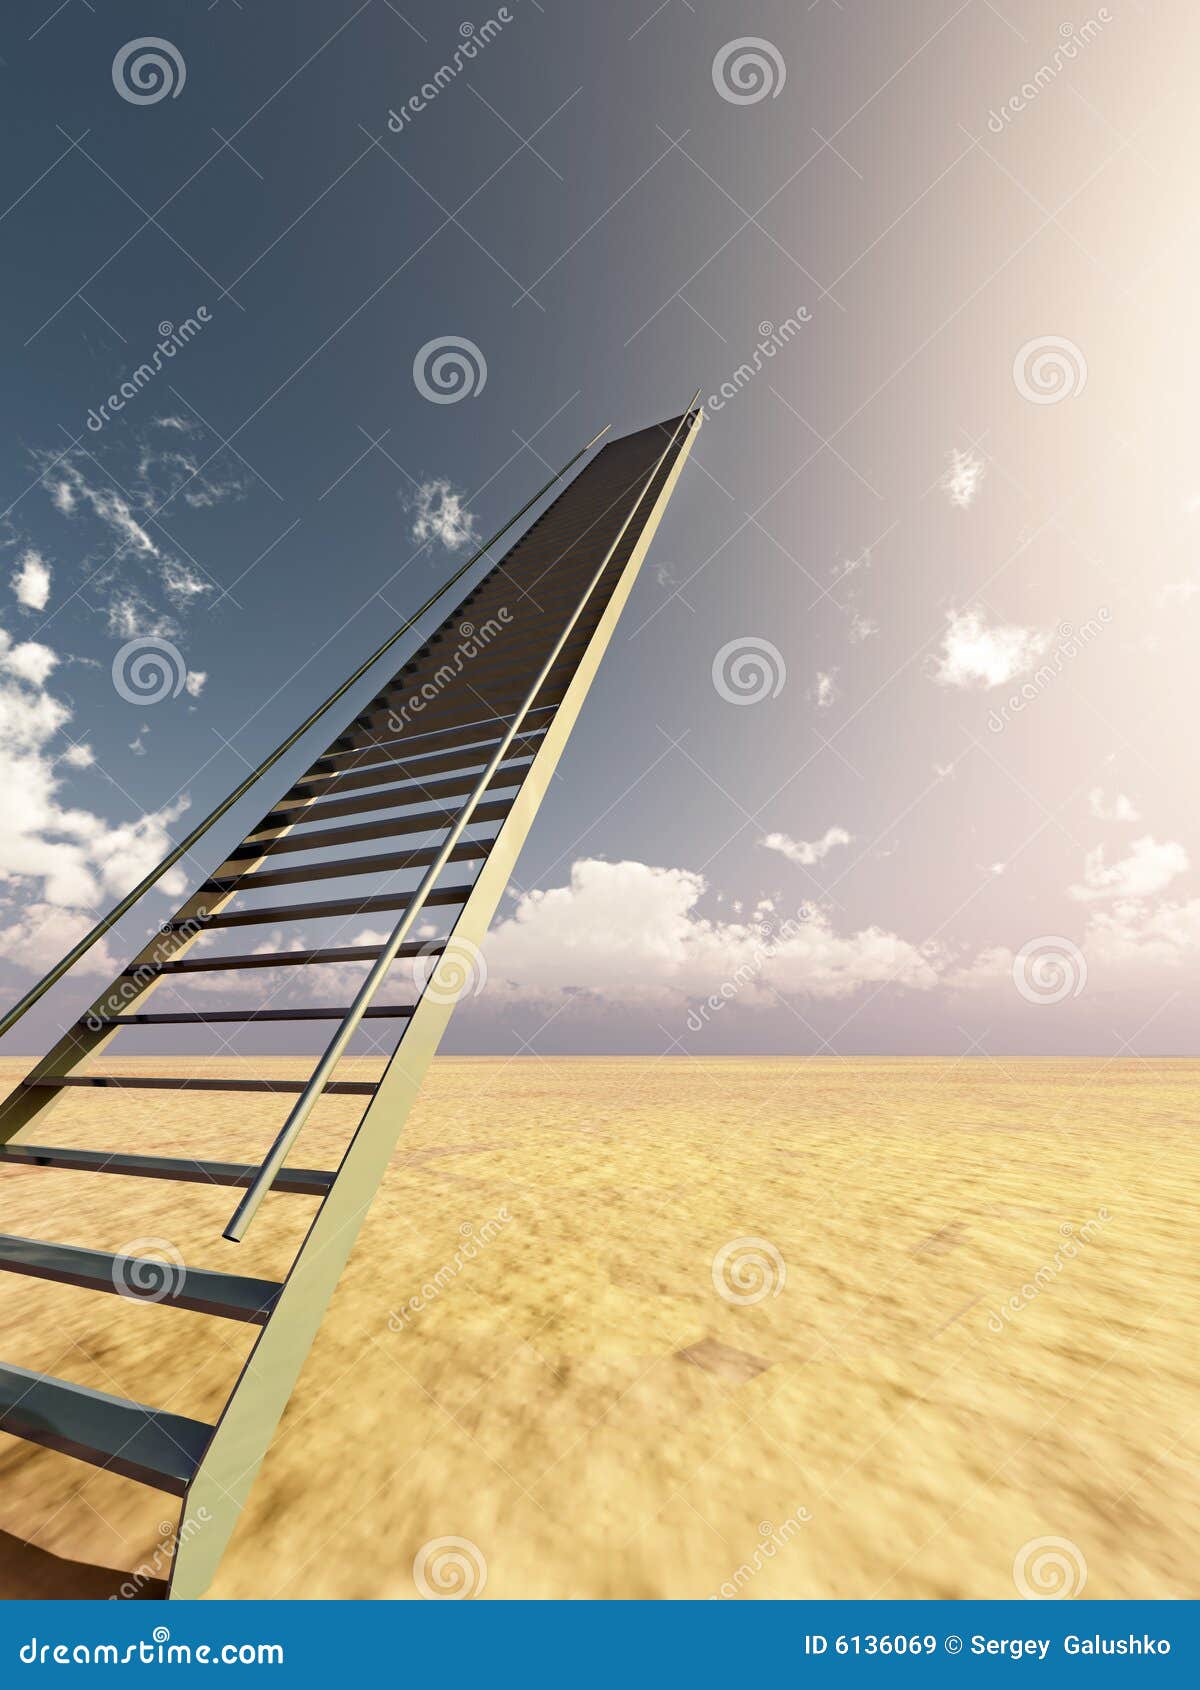 ladder-in-the-sky-stock-image-image-of-ladders-outdoors-6136069